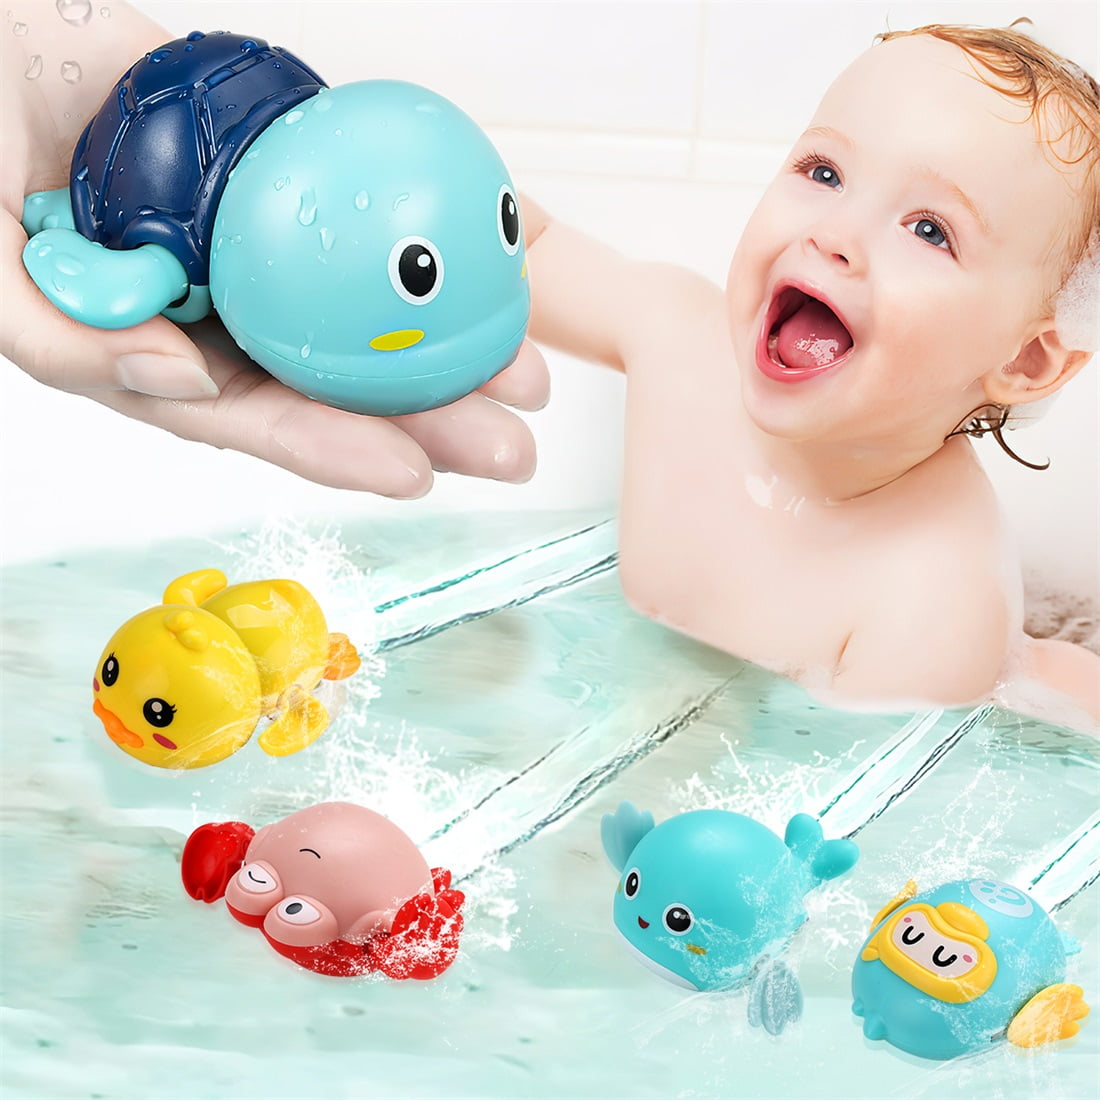 LZZAPJ Baby Bath Toys for Toddlers 1-3 Year Old, Bathtub Water Toys for  Kids Age 2-4, Contains 4 Stacking Cups, 2 Boats 2 Whale-Shaped Spoons, Gift